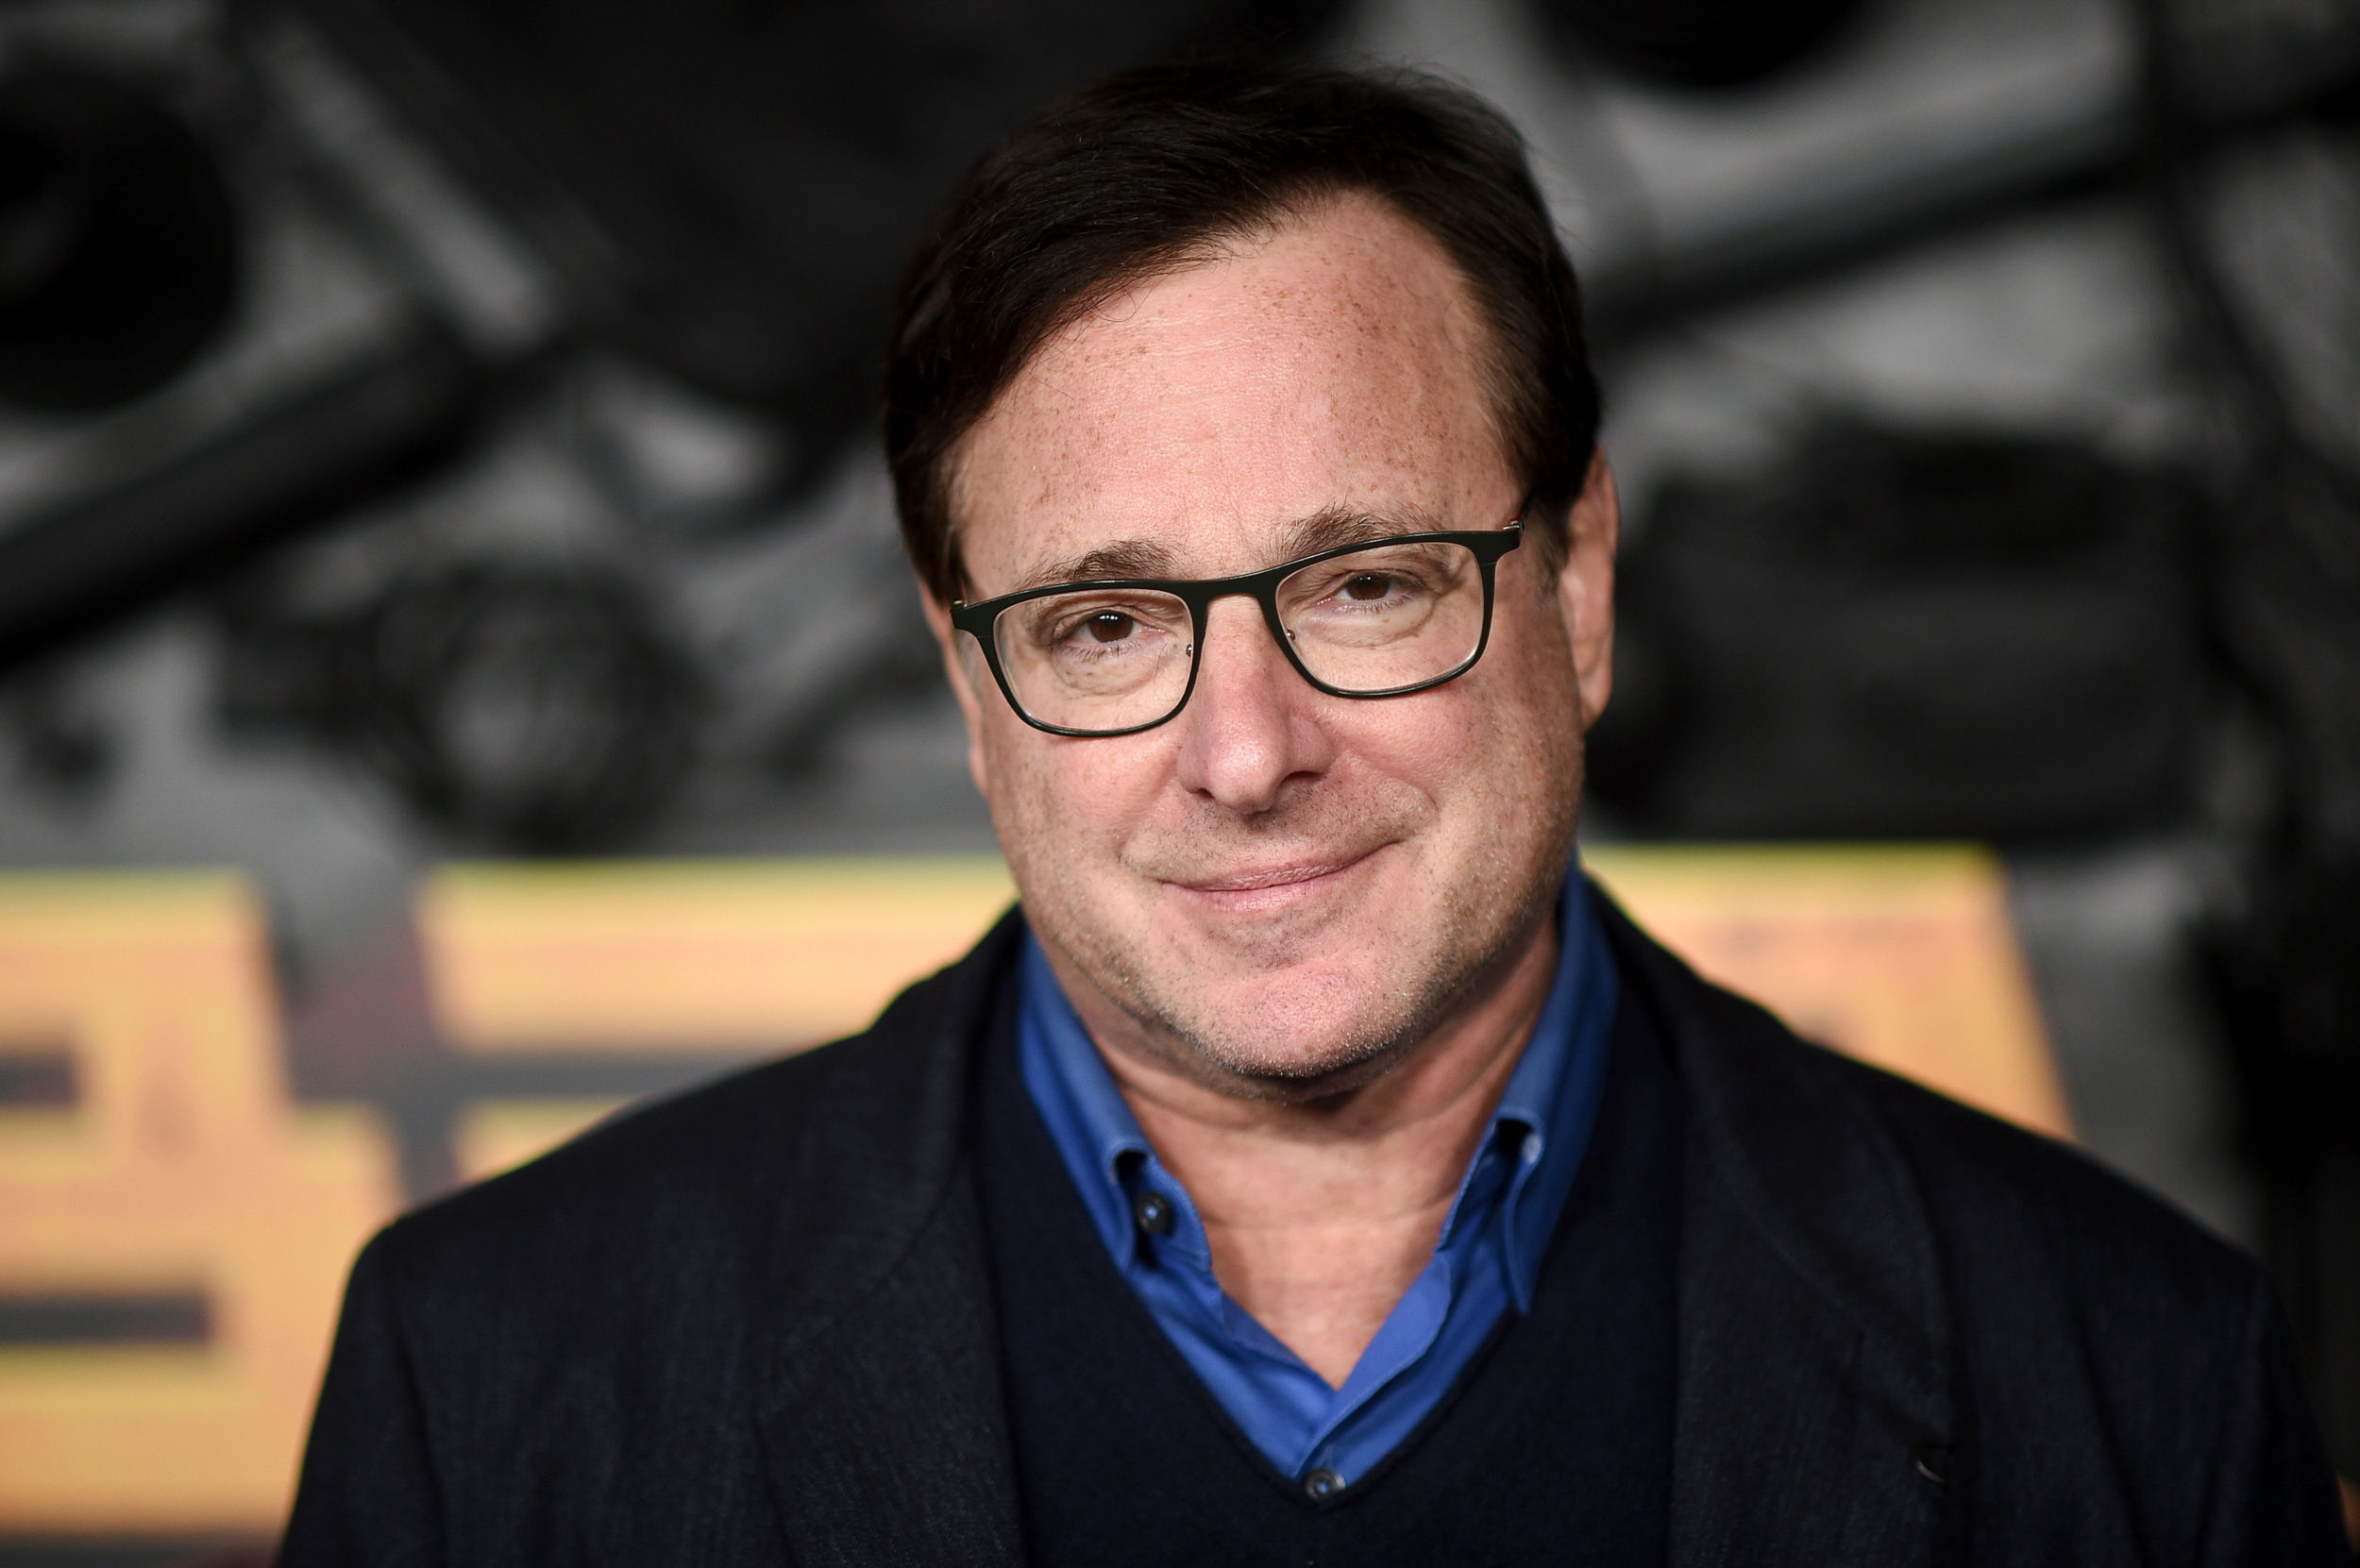 Actor-comedian Bob Saget died of head trauma, family says